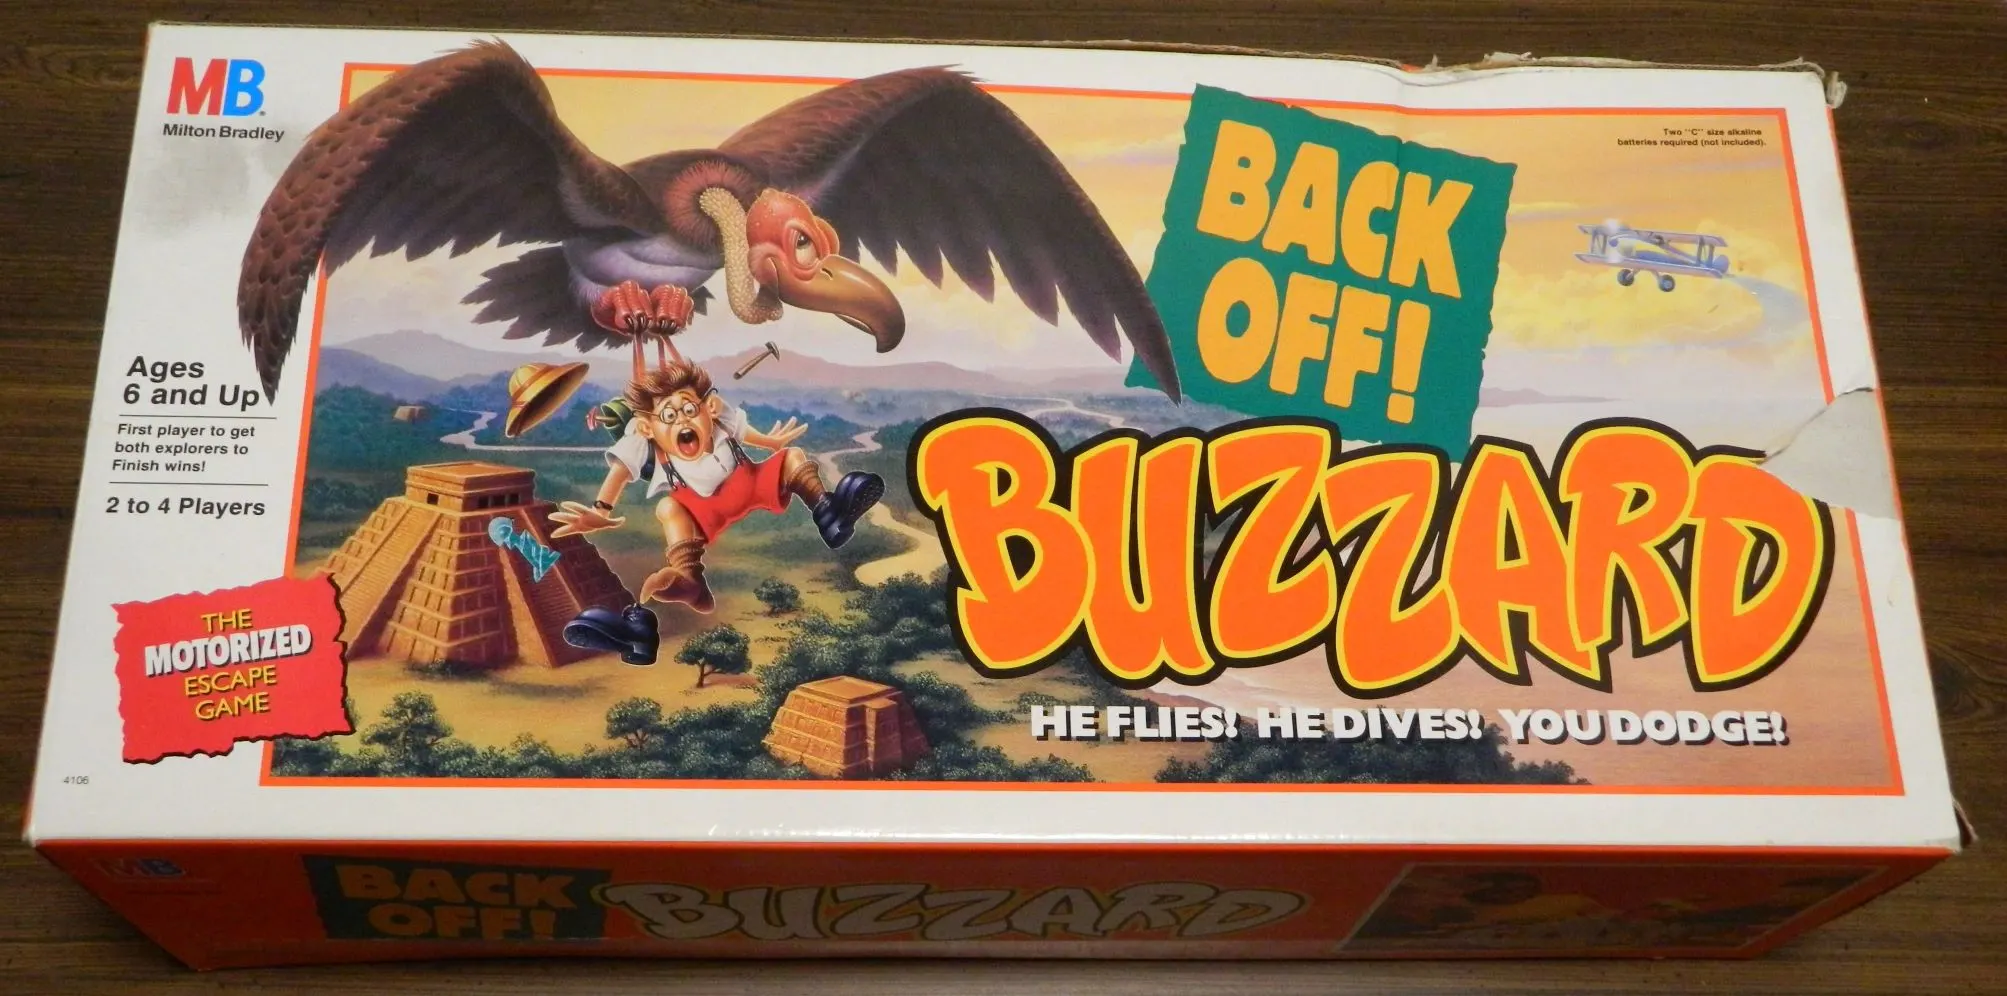 Bellz! Board Game Review and Rules - Geeky Hobbies